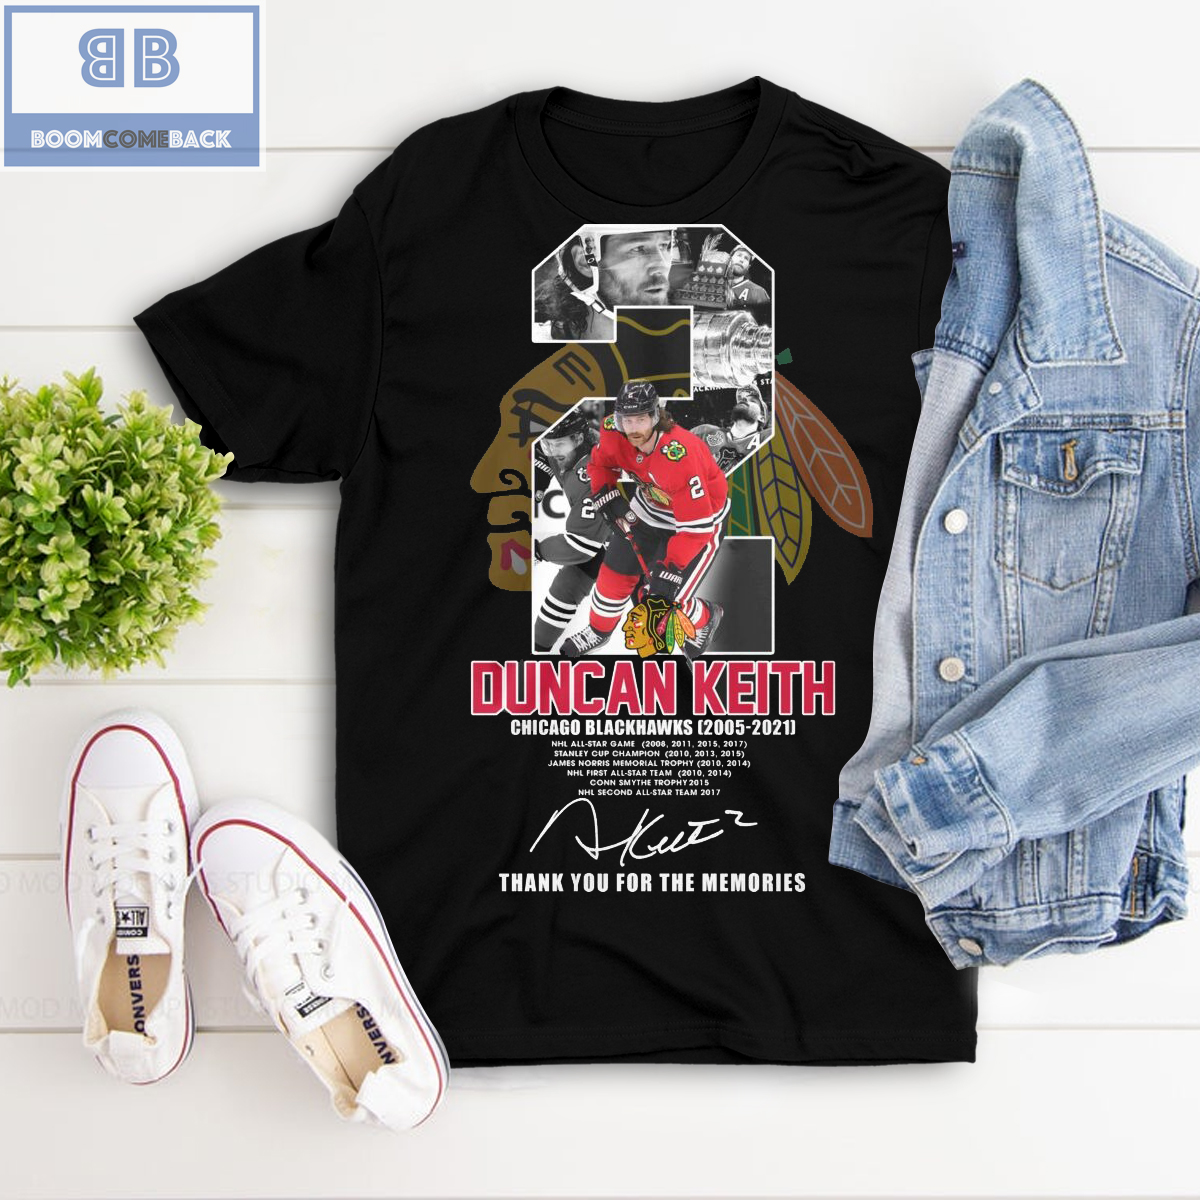 Duncan Keith 2 Thank You For The Memories Shirt